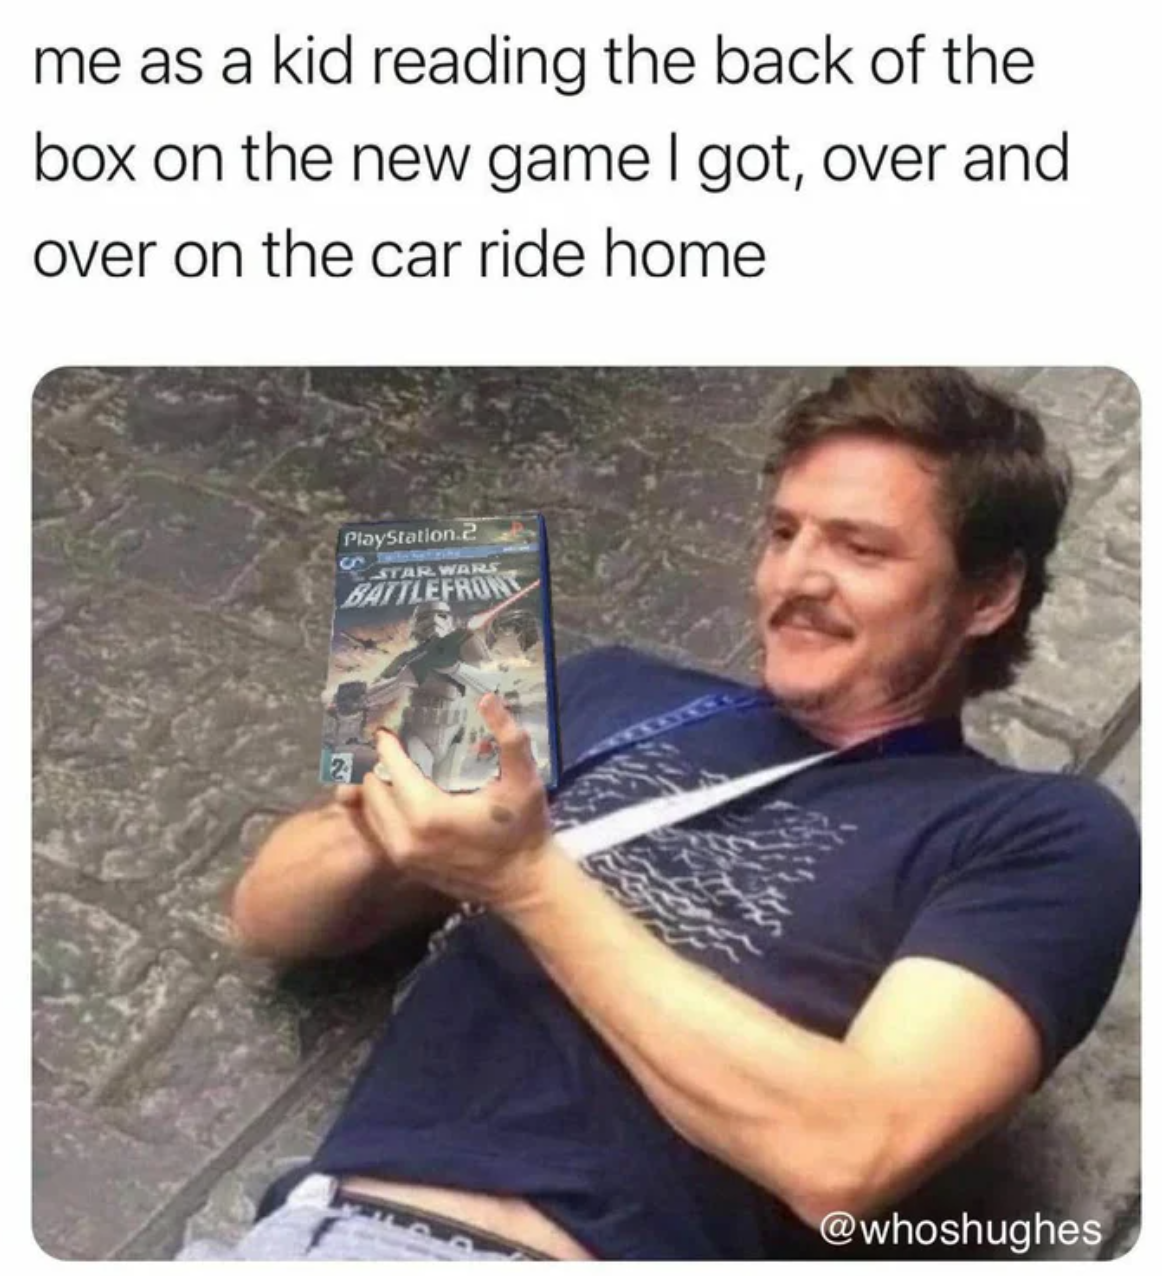 funny gaming memes  - digibyte memes - me as a kid reading the back of the box on the new game I got, over and over on the car ride home PlayStation Tam Battlefrons